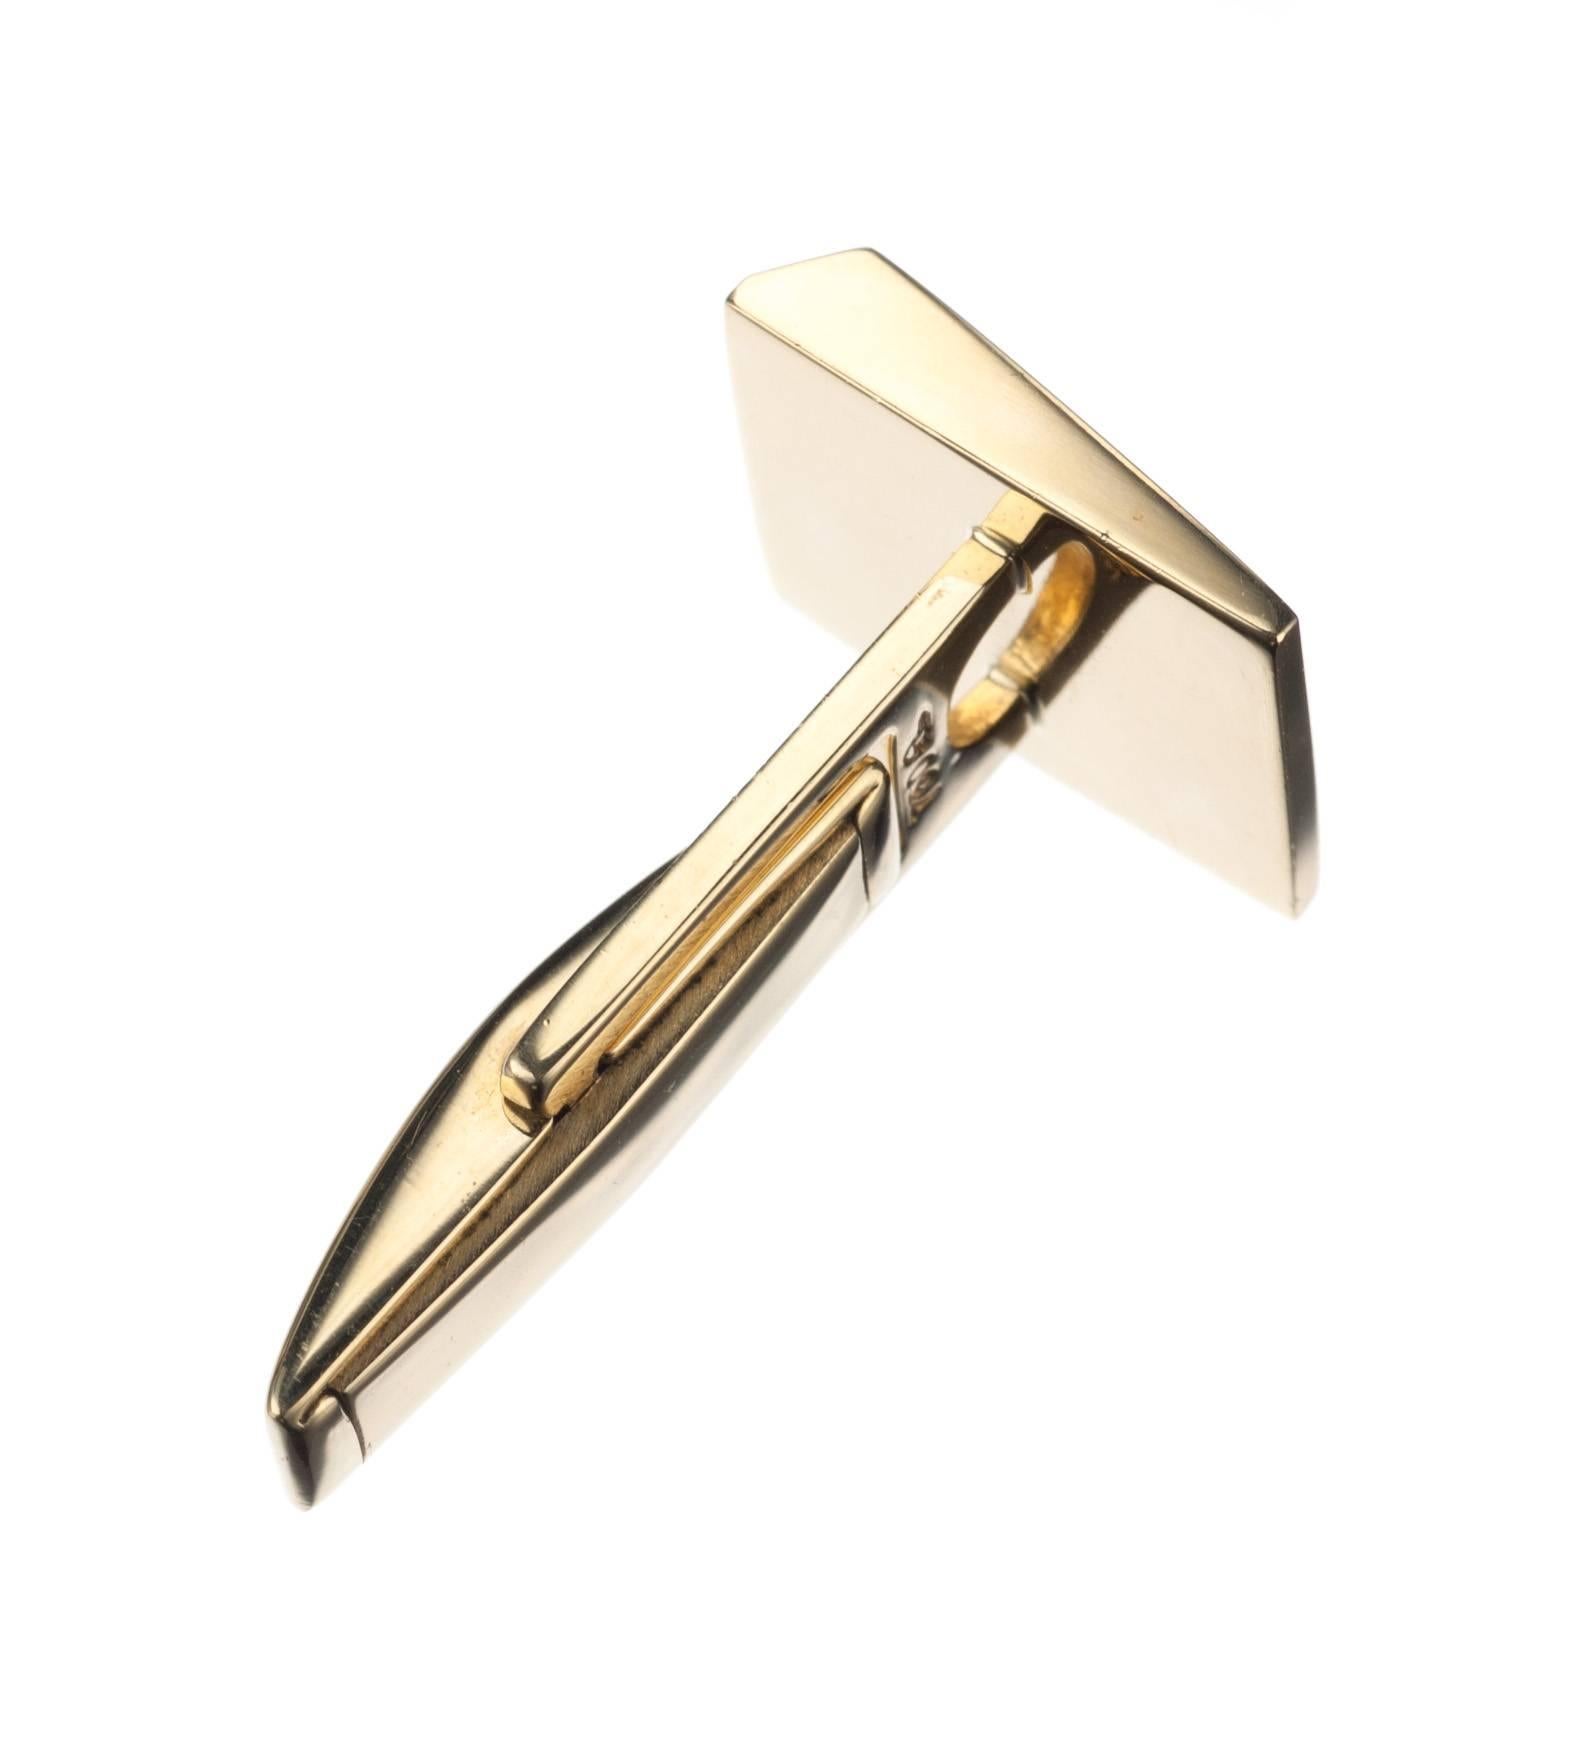 Wedge Cufflinks in 18 Karat Yellow Gold In Excellent Condition For Sale In Saint Louis, MO